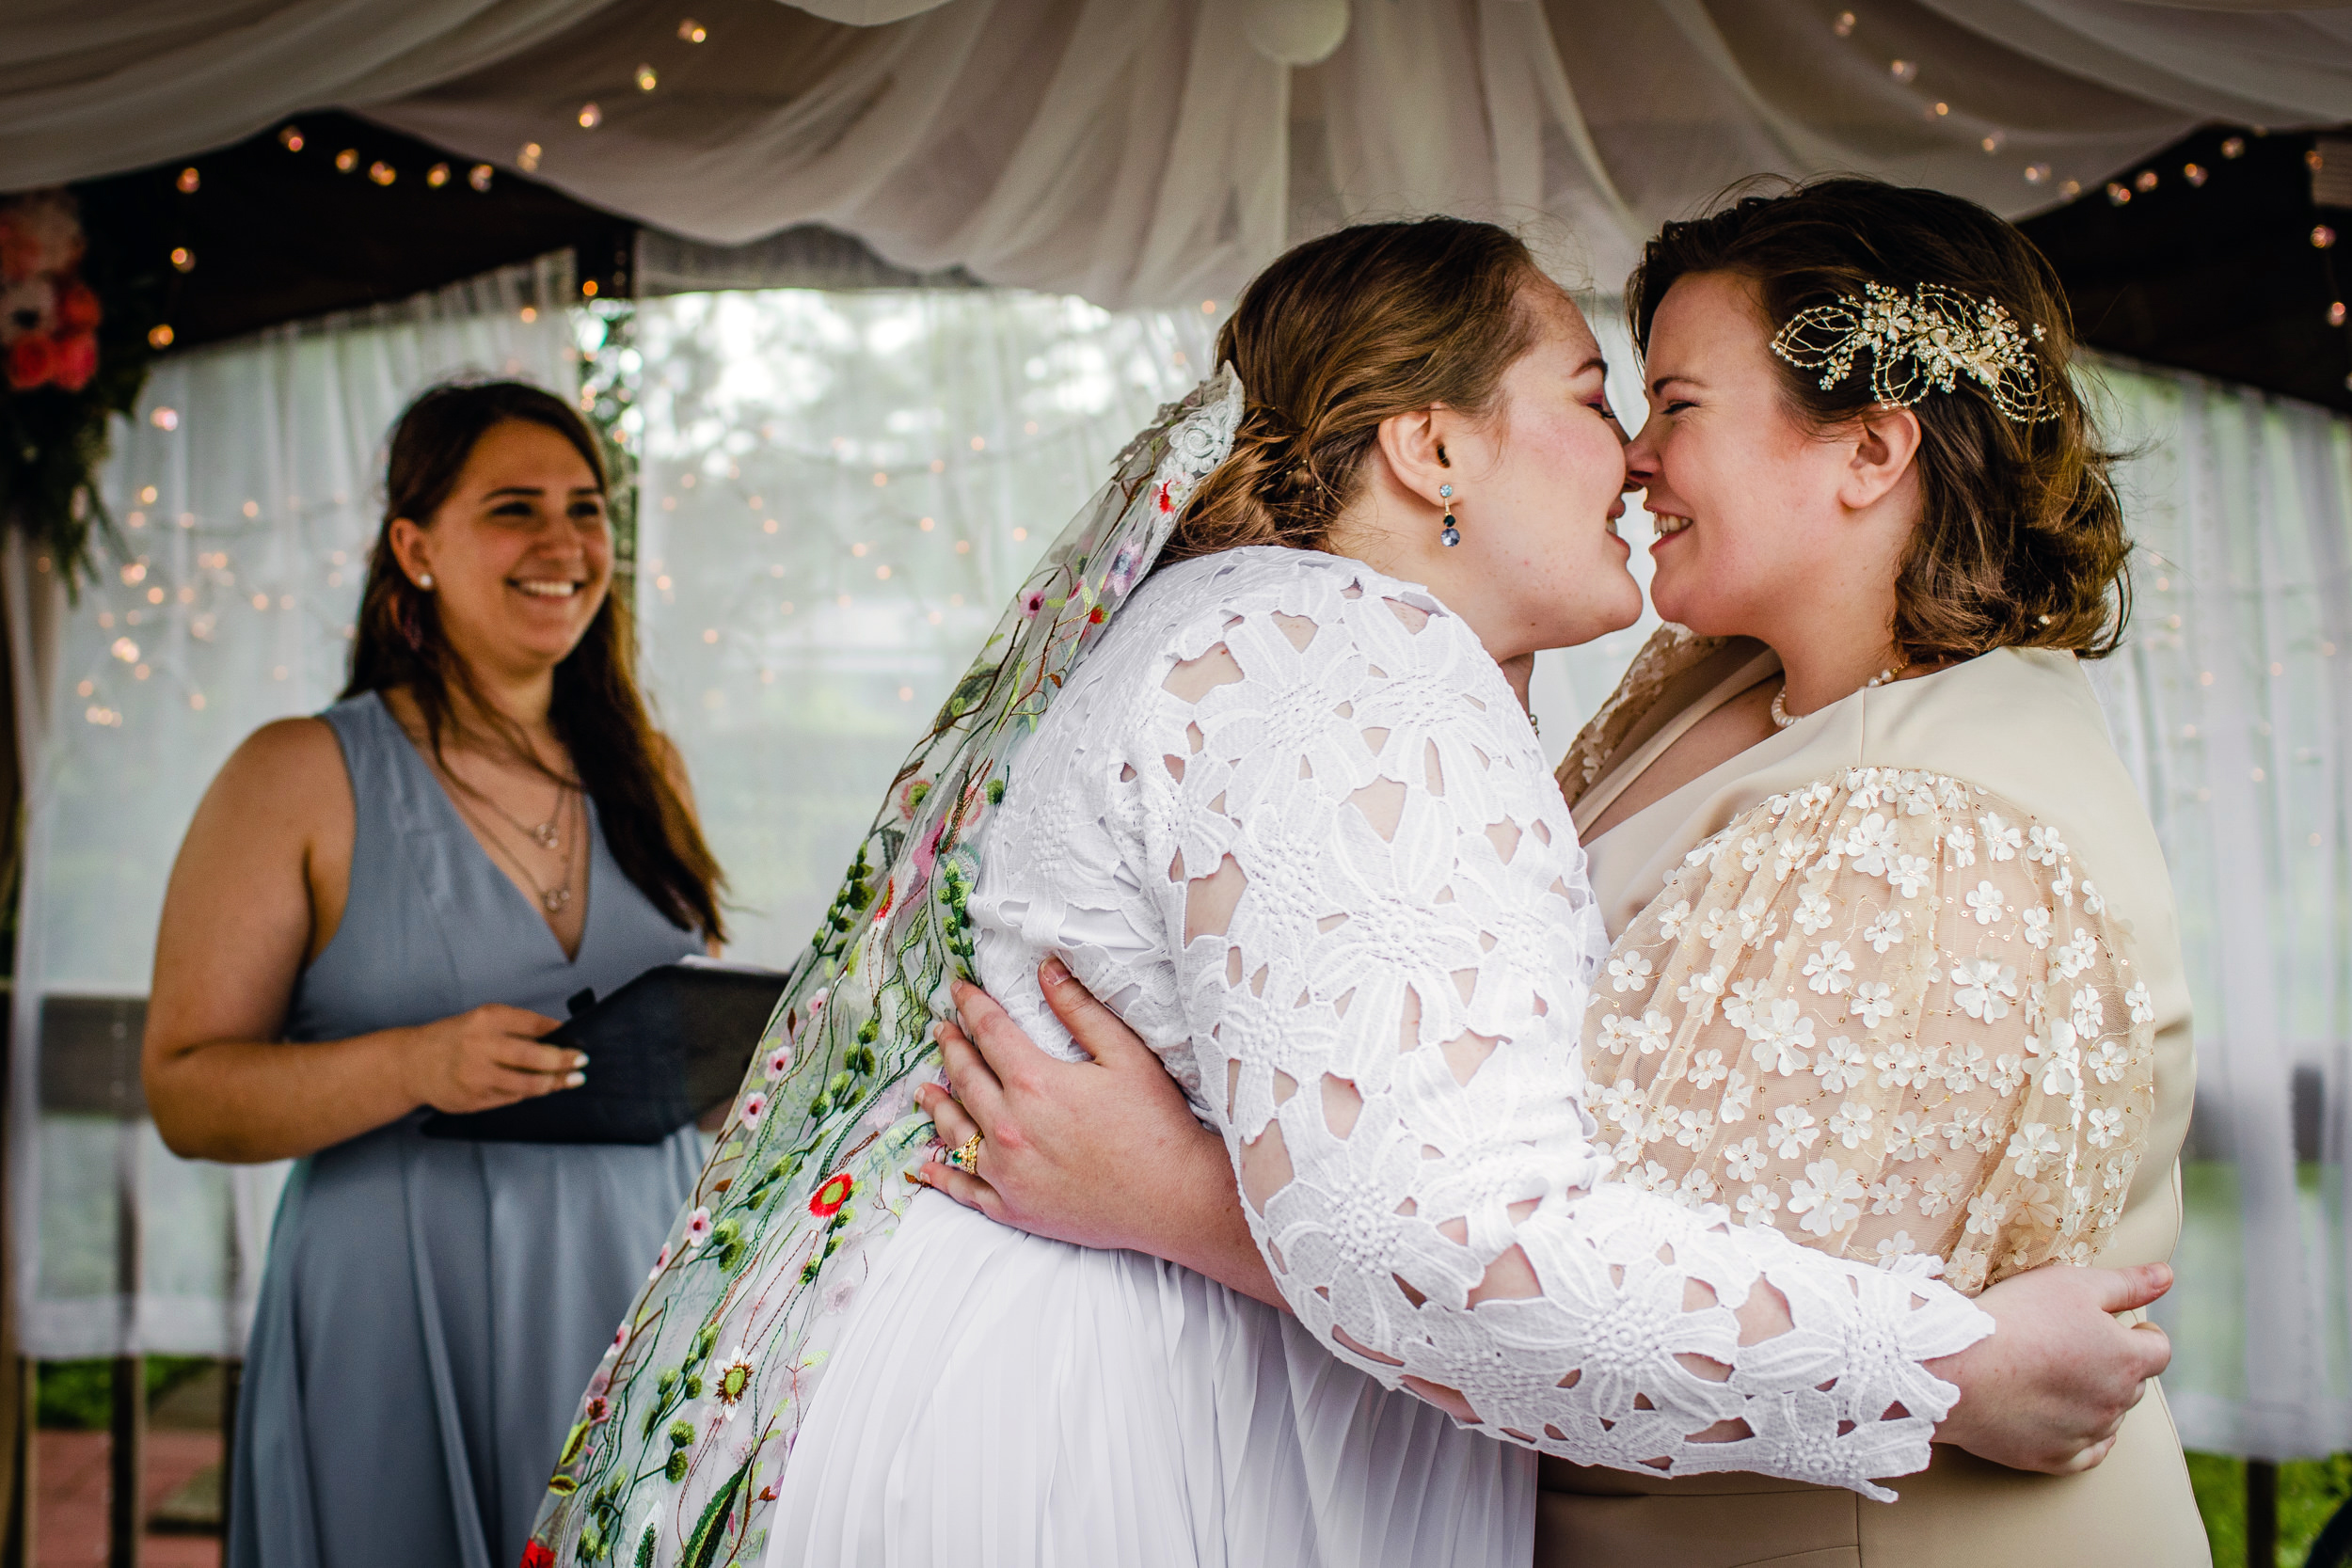 Brides share a first kiss during a backyard wedding in New Lenox, Illinois.